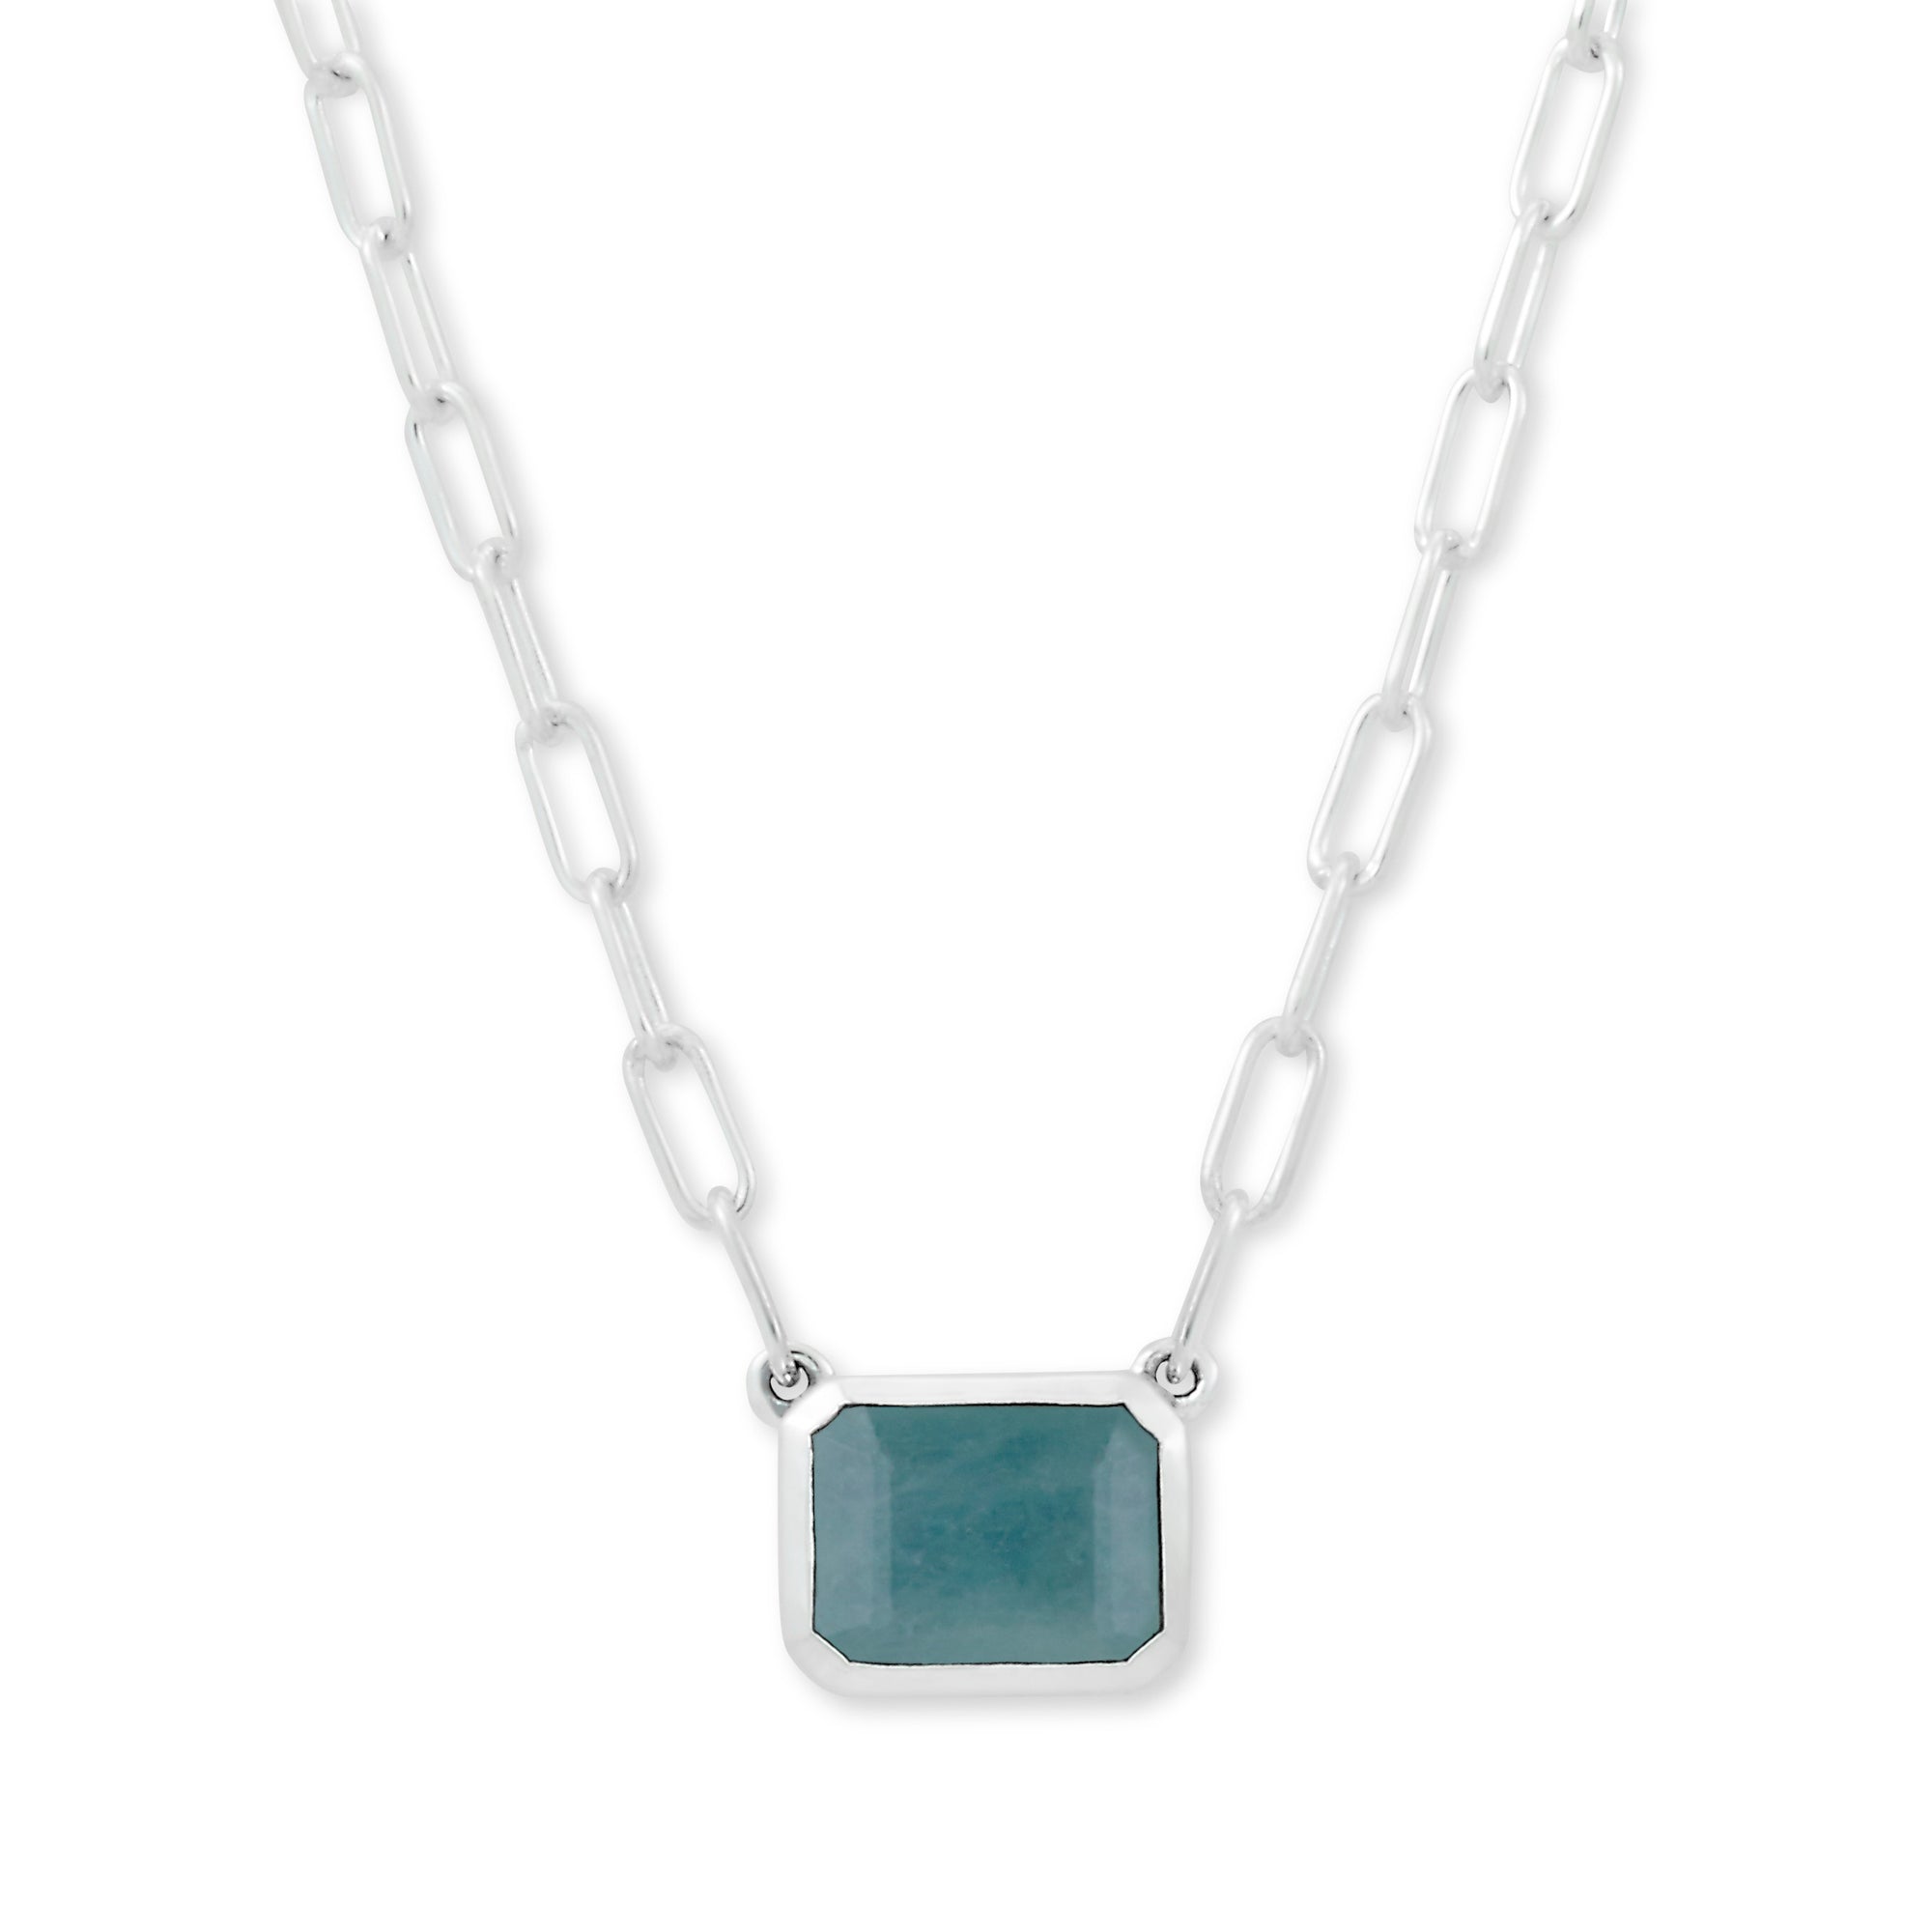 Aquamarine Eirini Necklace available at Talisman Collection Fine Jewelers in El Dorado Hills, CA and online. Specs: Aquamarine Eirini Necklace features an emerald-cut aquamarine solitaire measuring 7x9mm, and is set in Sterling Silver. 